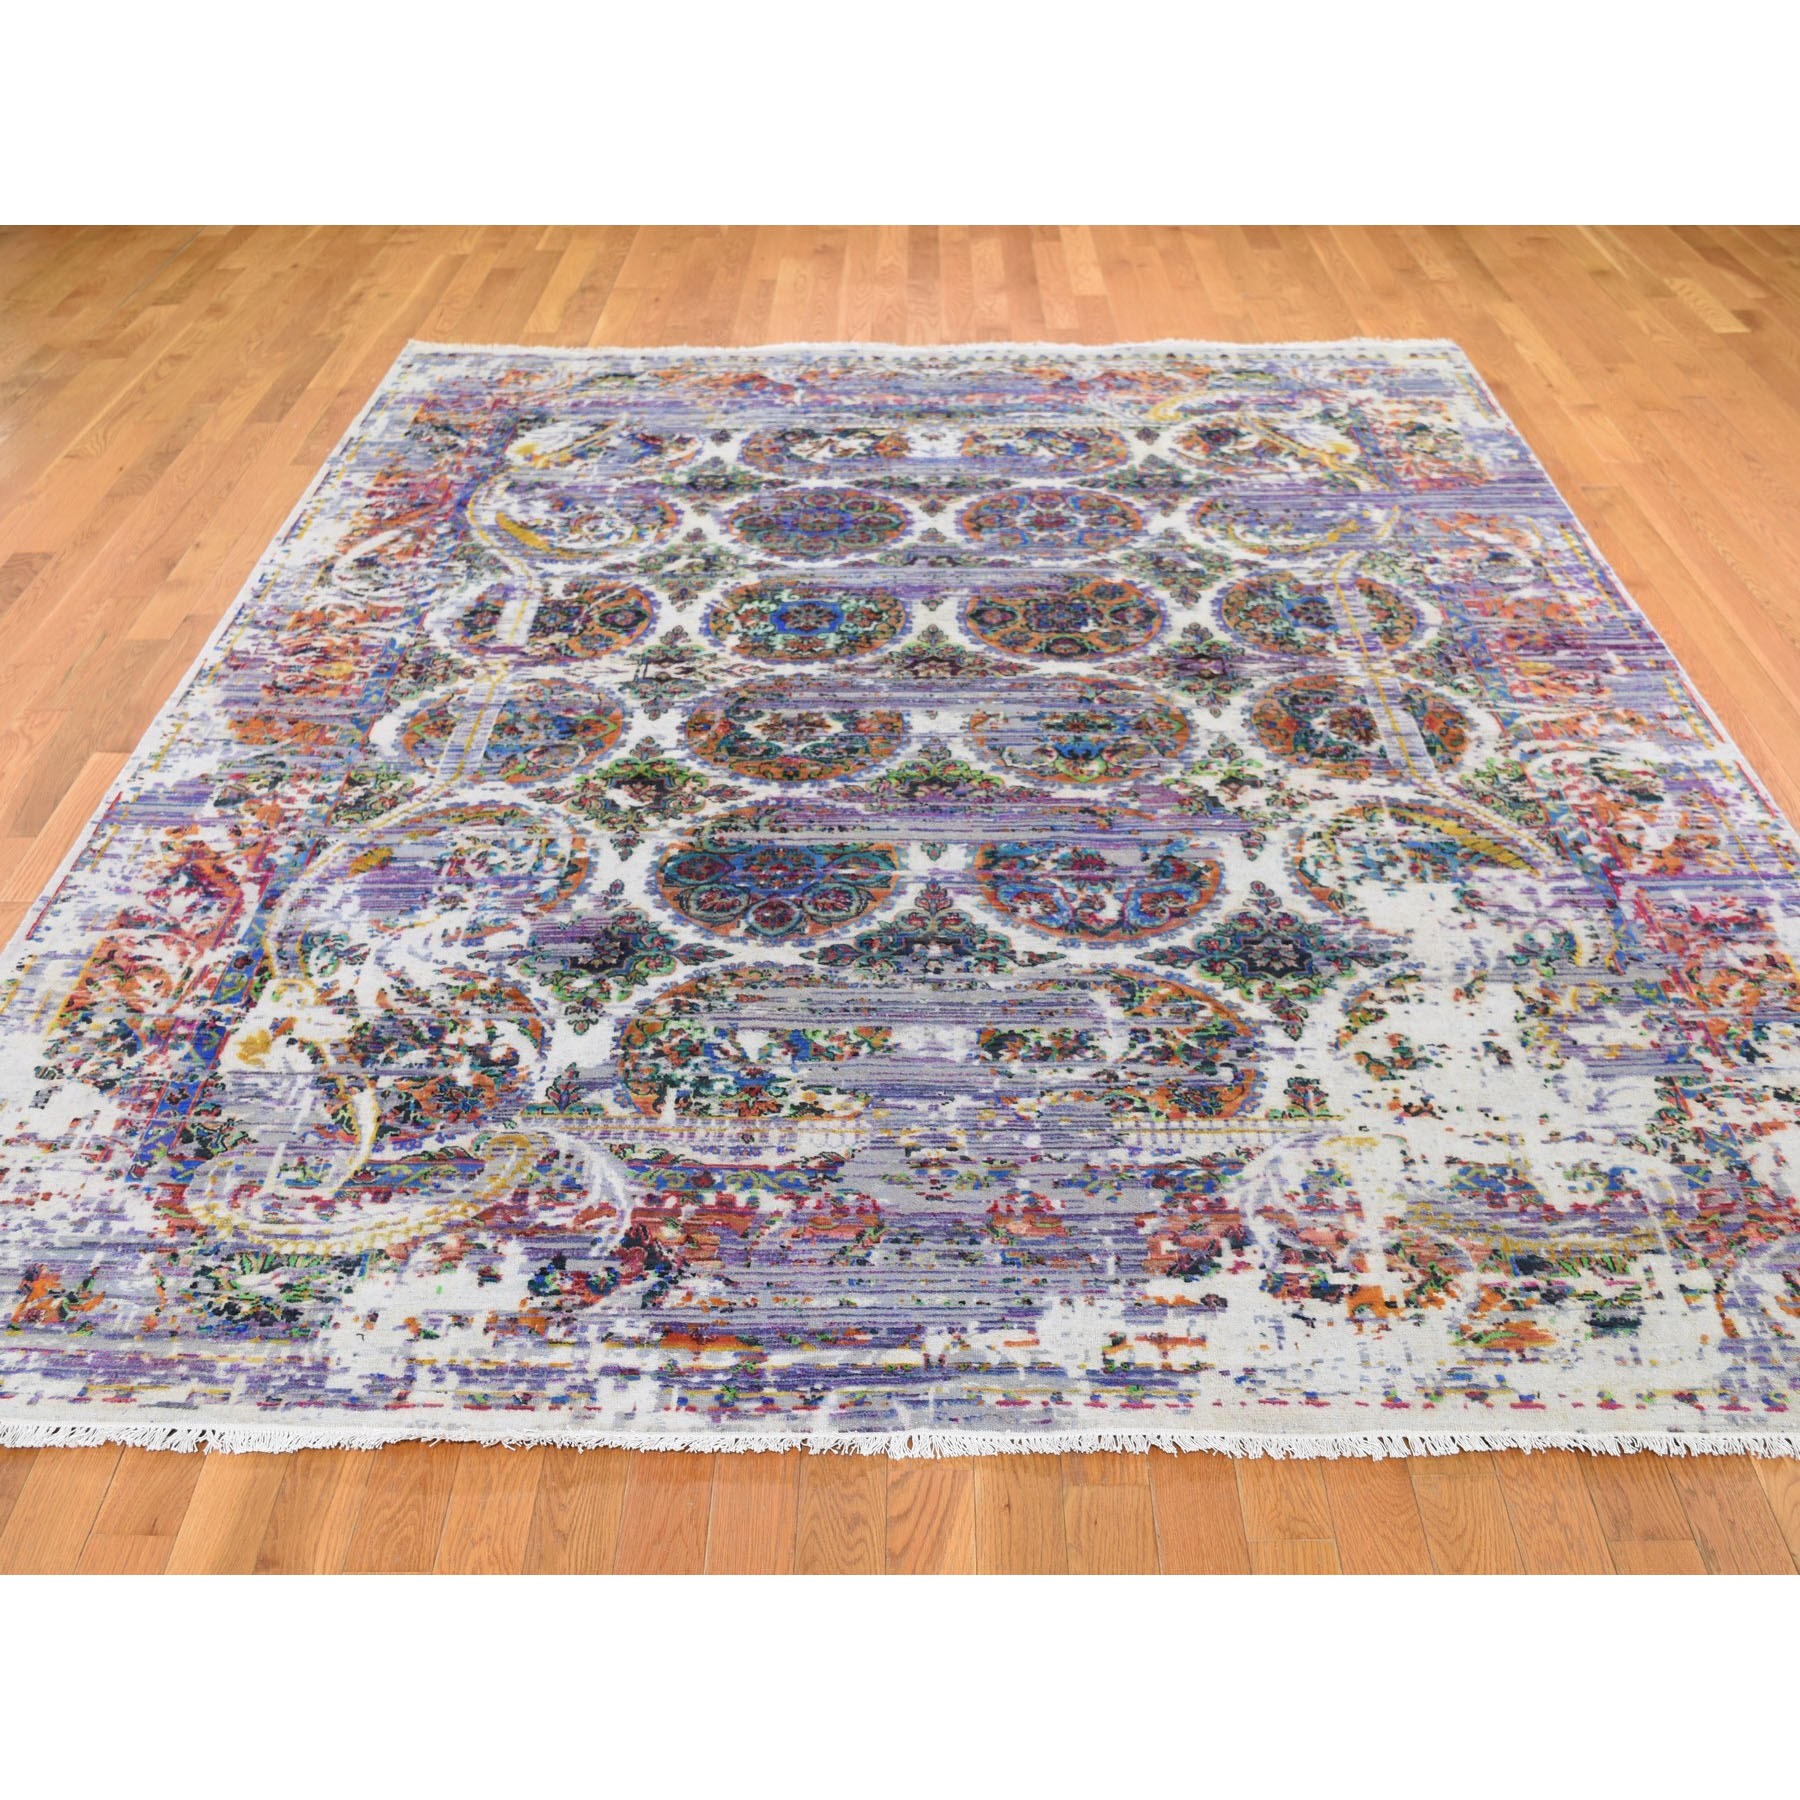 8-x10- ERASED ROSSETS, Colorful Sari Silk With Textured Wool Hand-Knotted Oriental Rug 